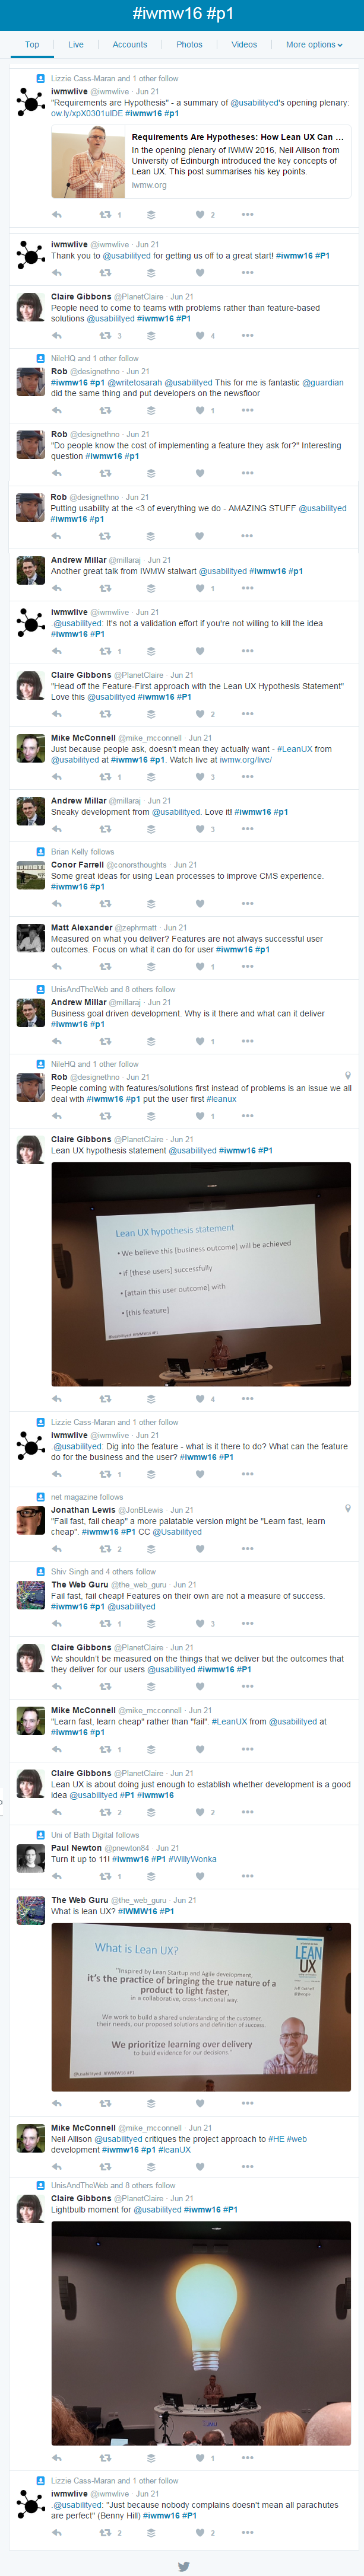 Screengrab of twitter feed for #iwmw16 #p1